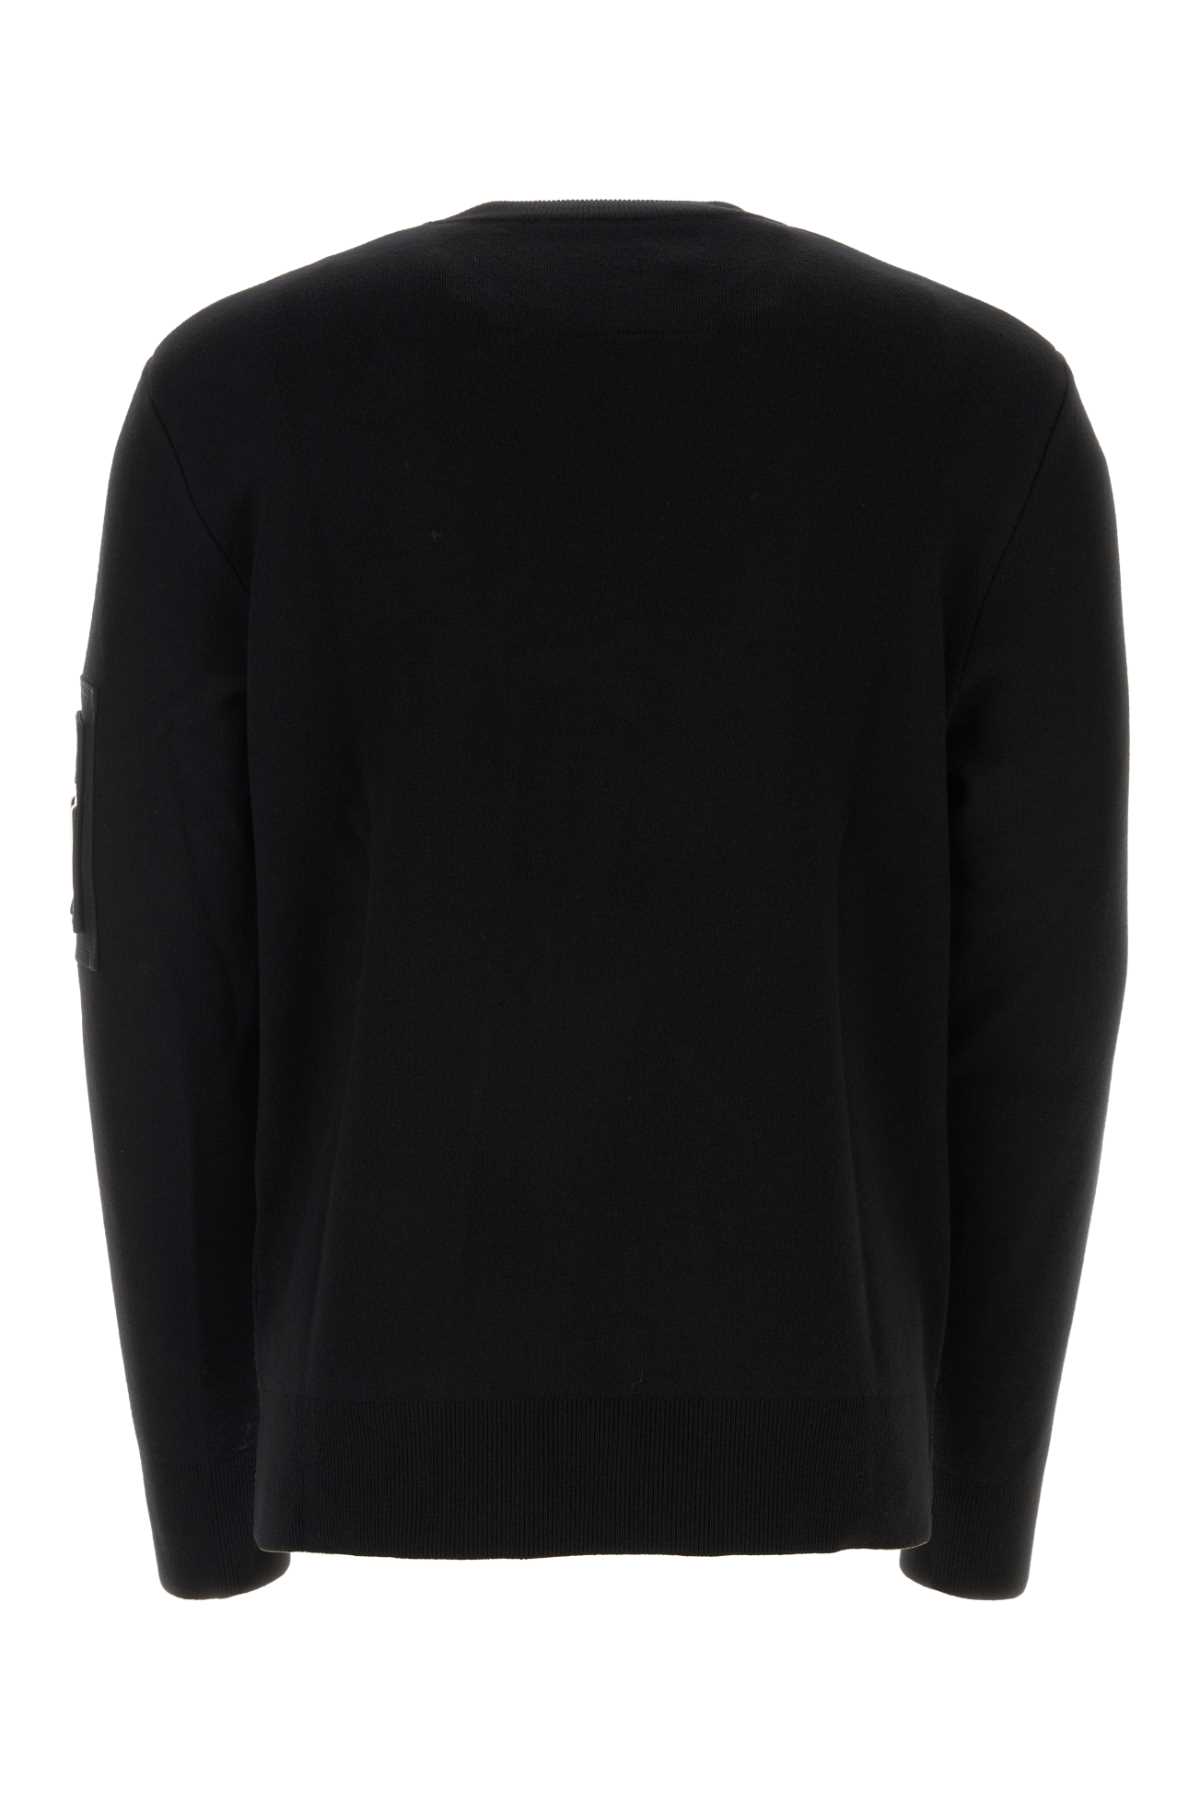 Shop Givenchy Black Wool Sweater